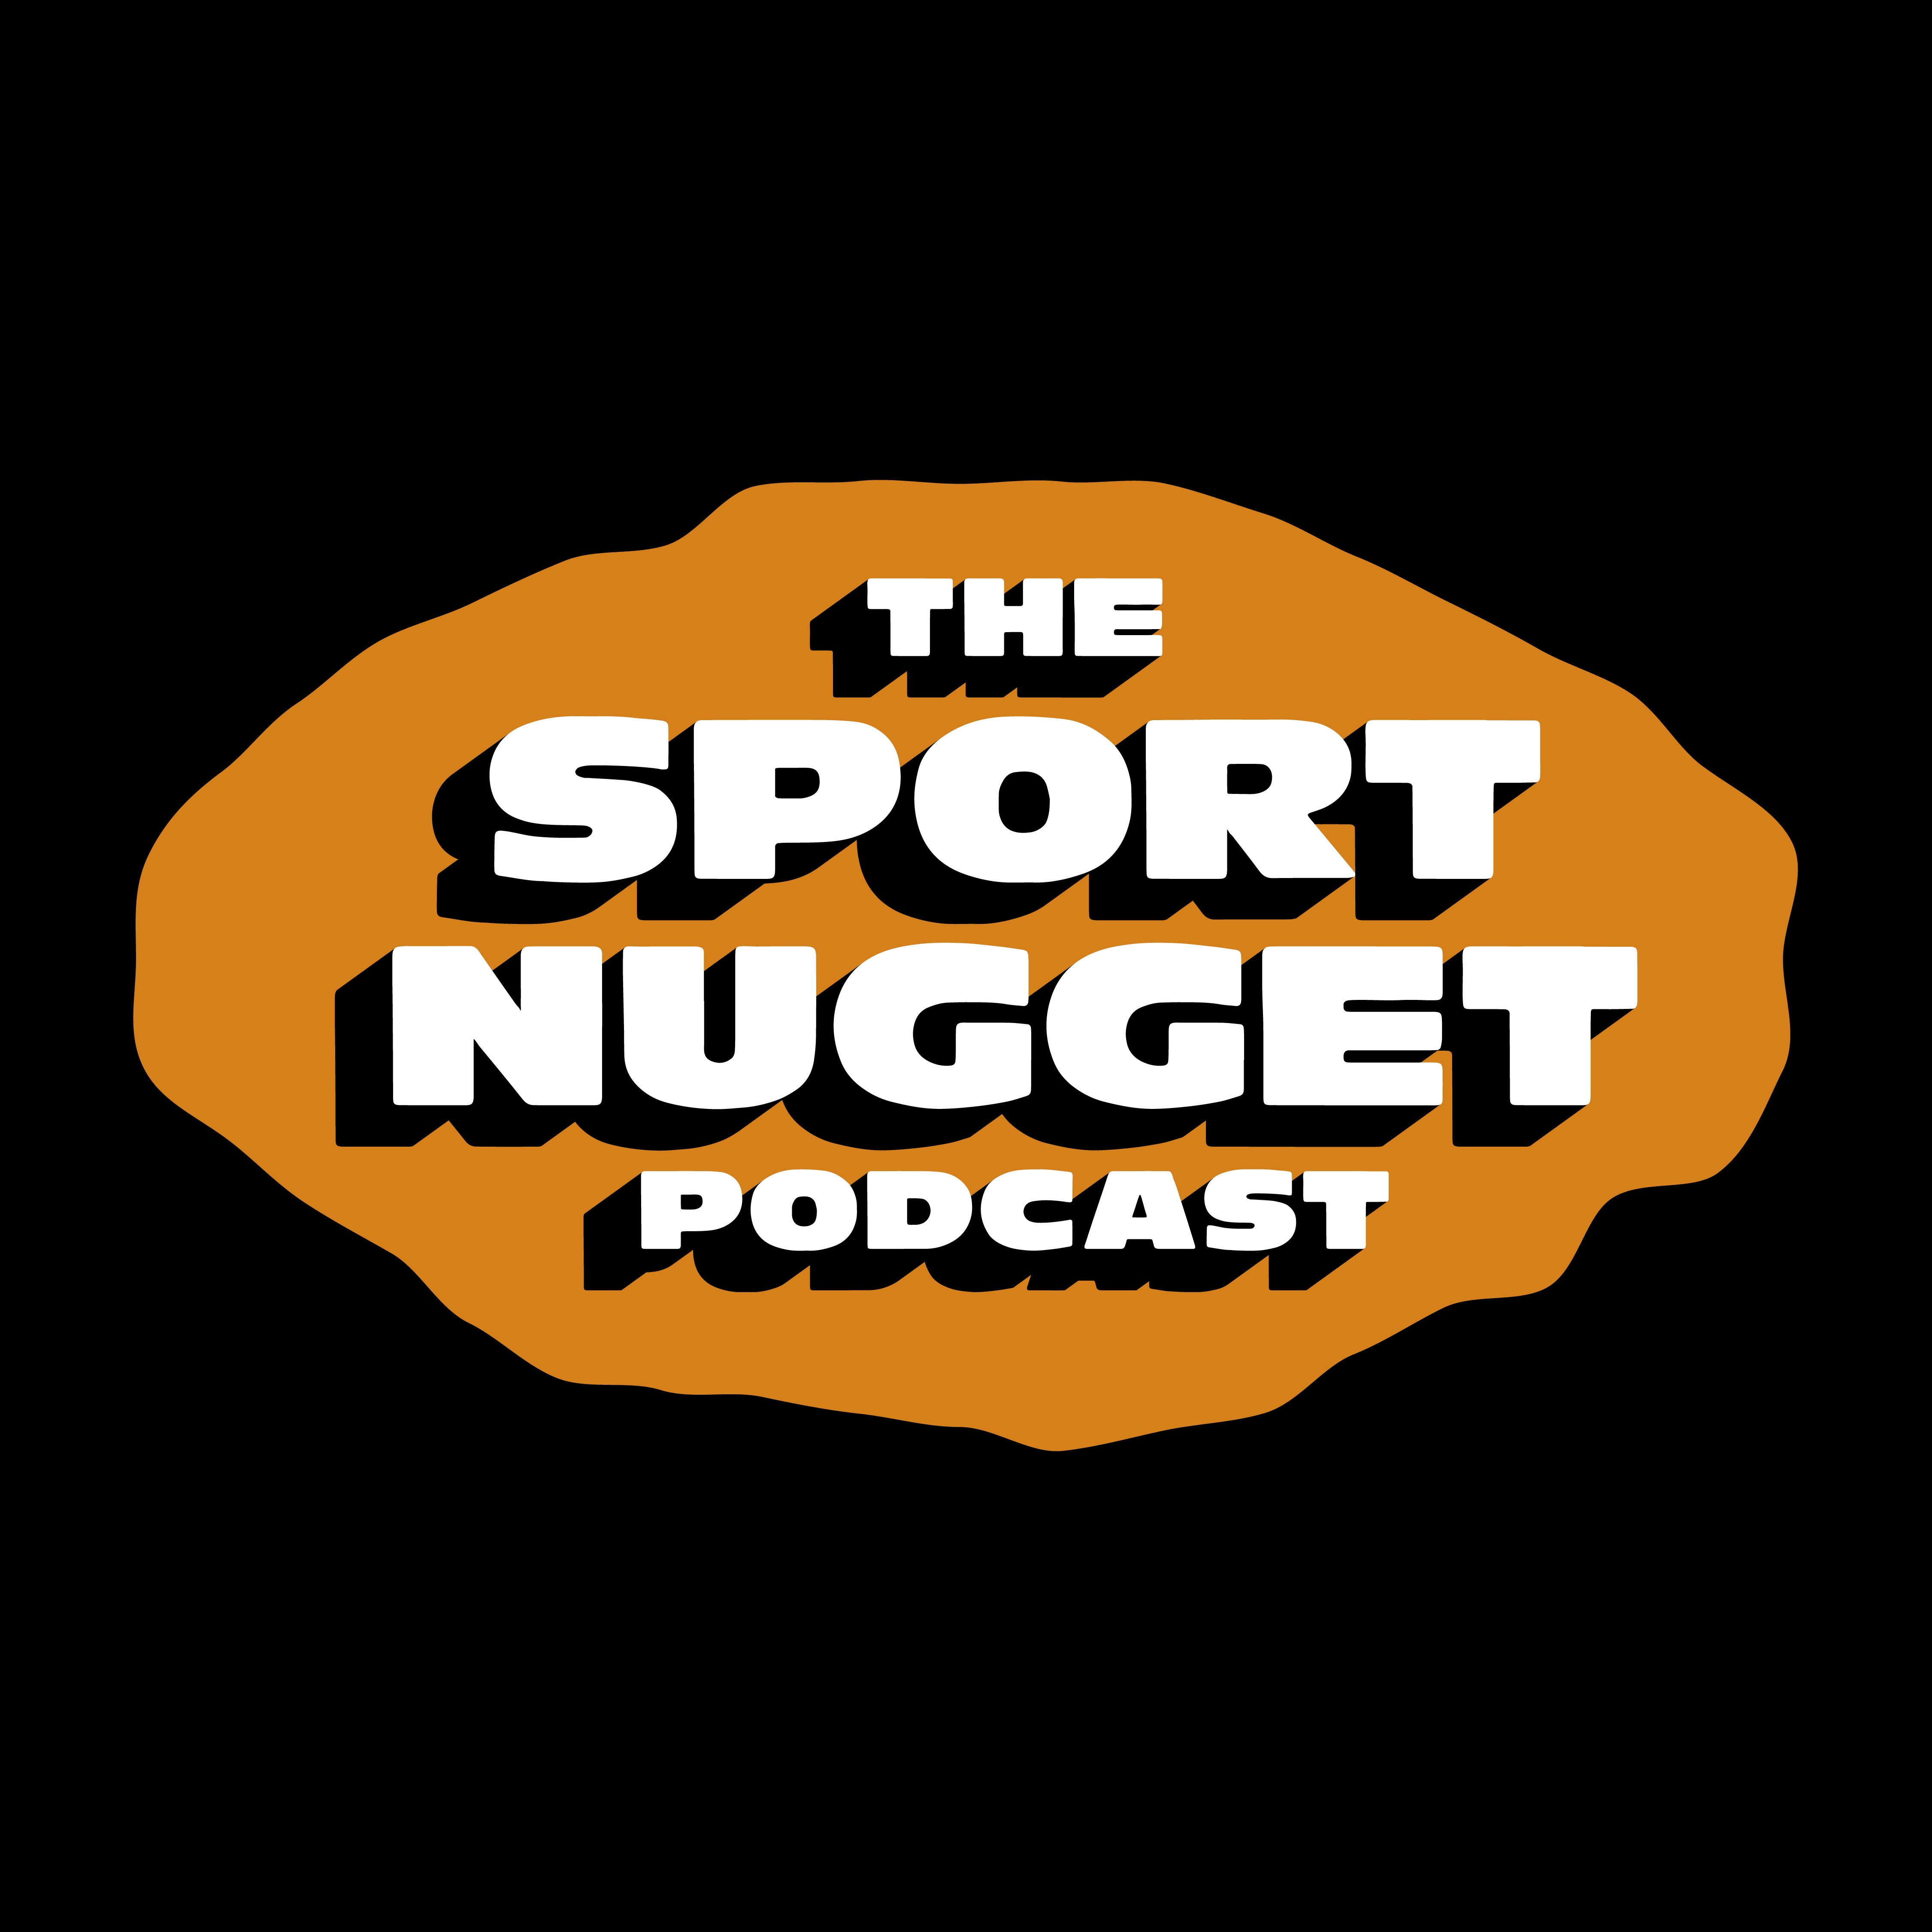 The Sport Nugget Podcast Logo